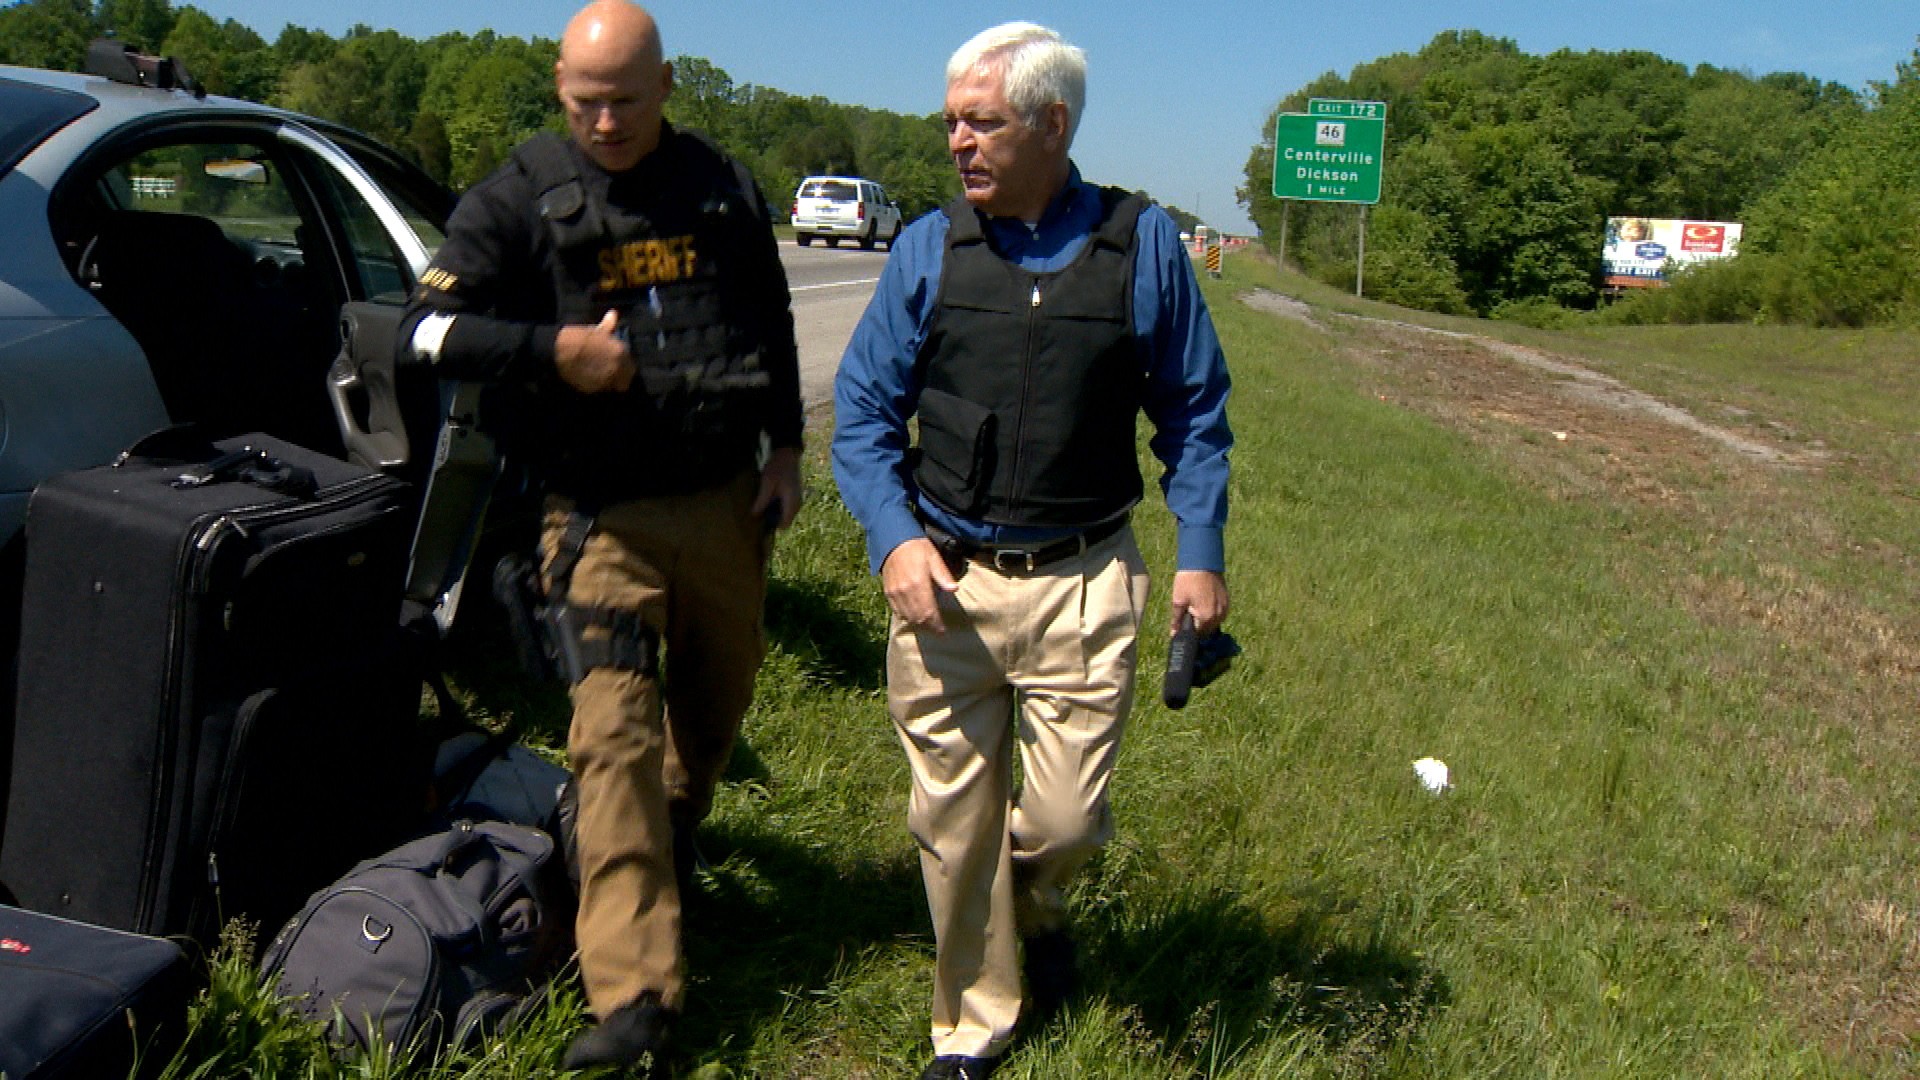 Williams follows a drug interdiction agent in 2011 as part of his duPont Award-winning investigation of Tennessee’s civil asset forfeiture program that allowed officers to seize cash from drivers with no real evidence that the money was illegal. (photo: Bryan Staples/WTVF)